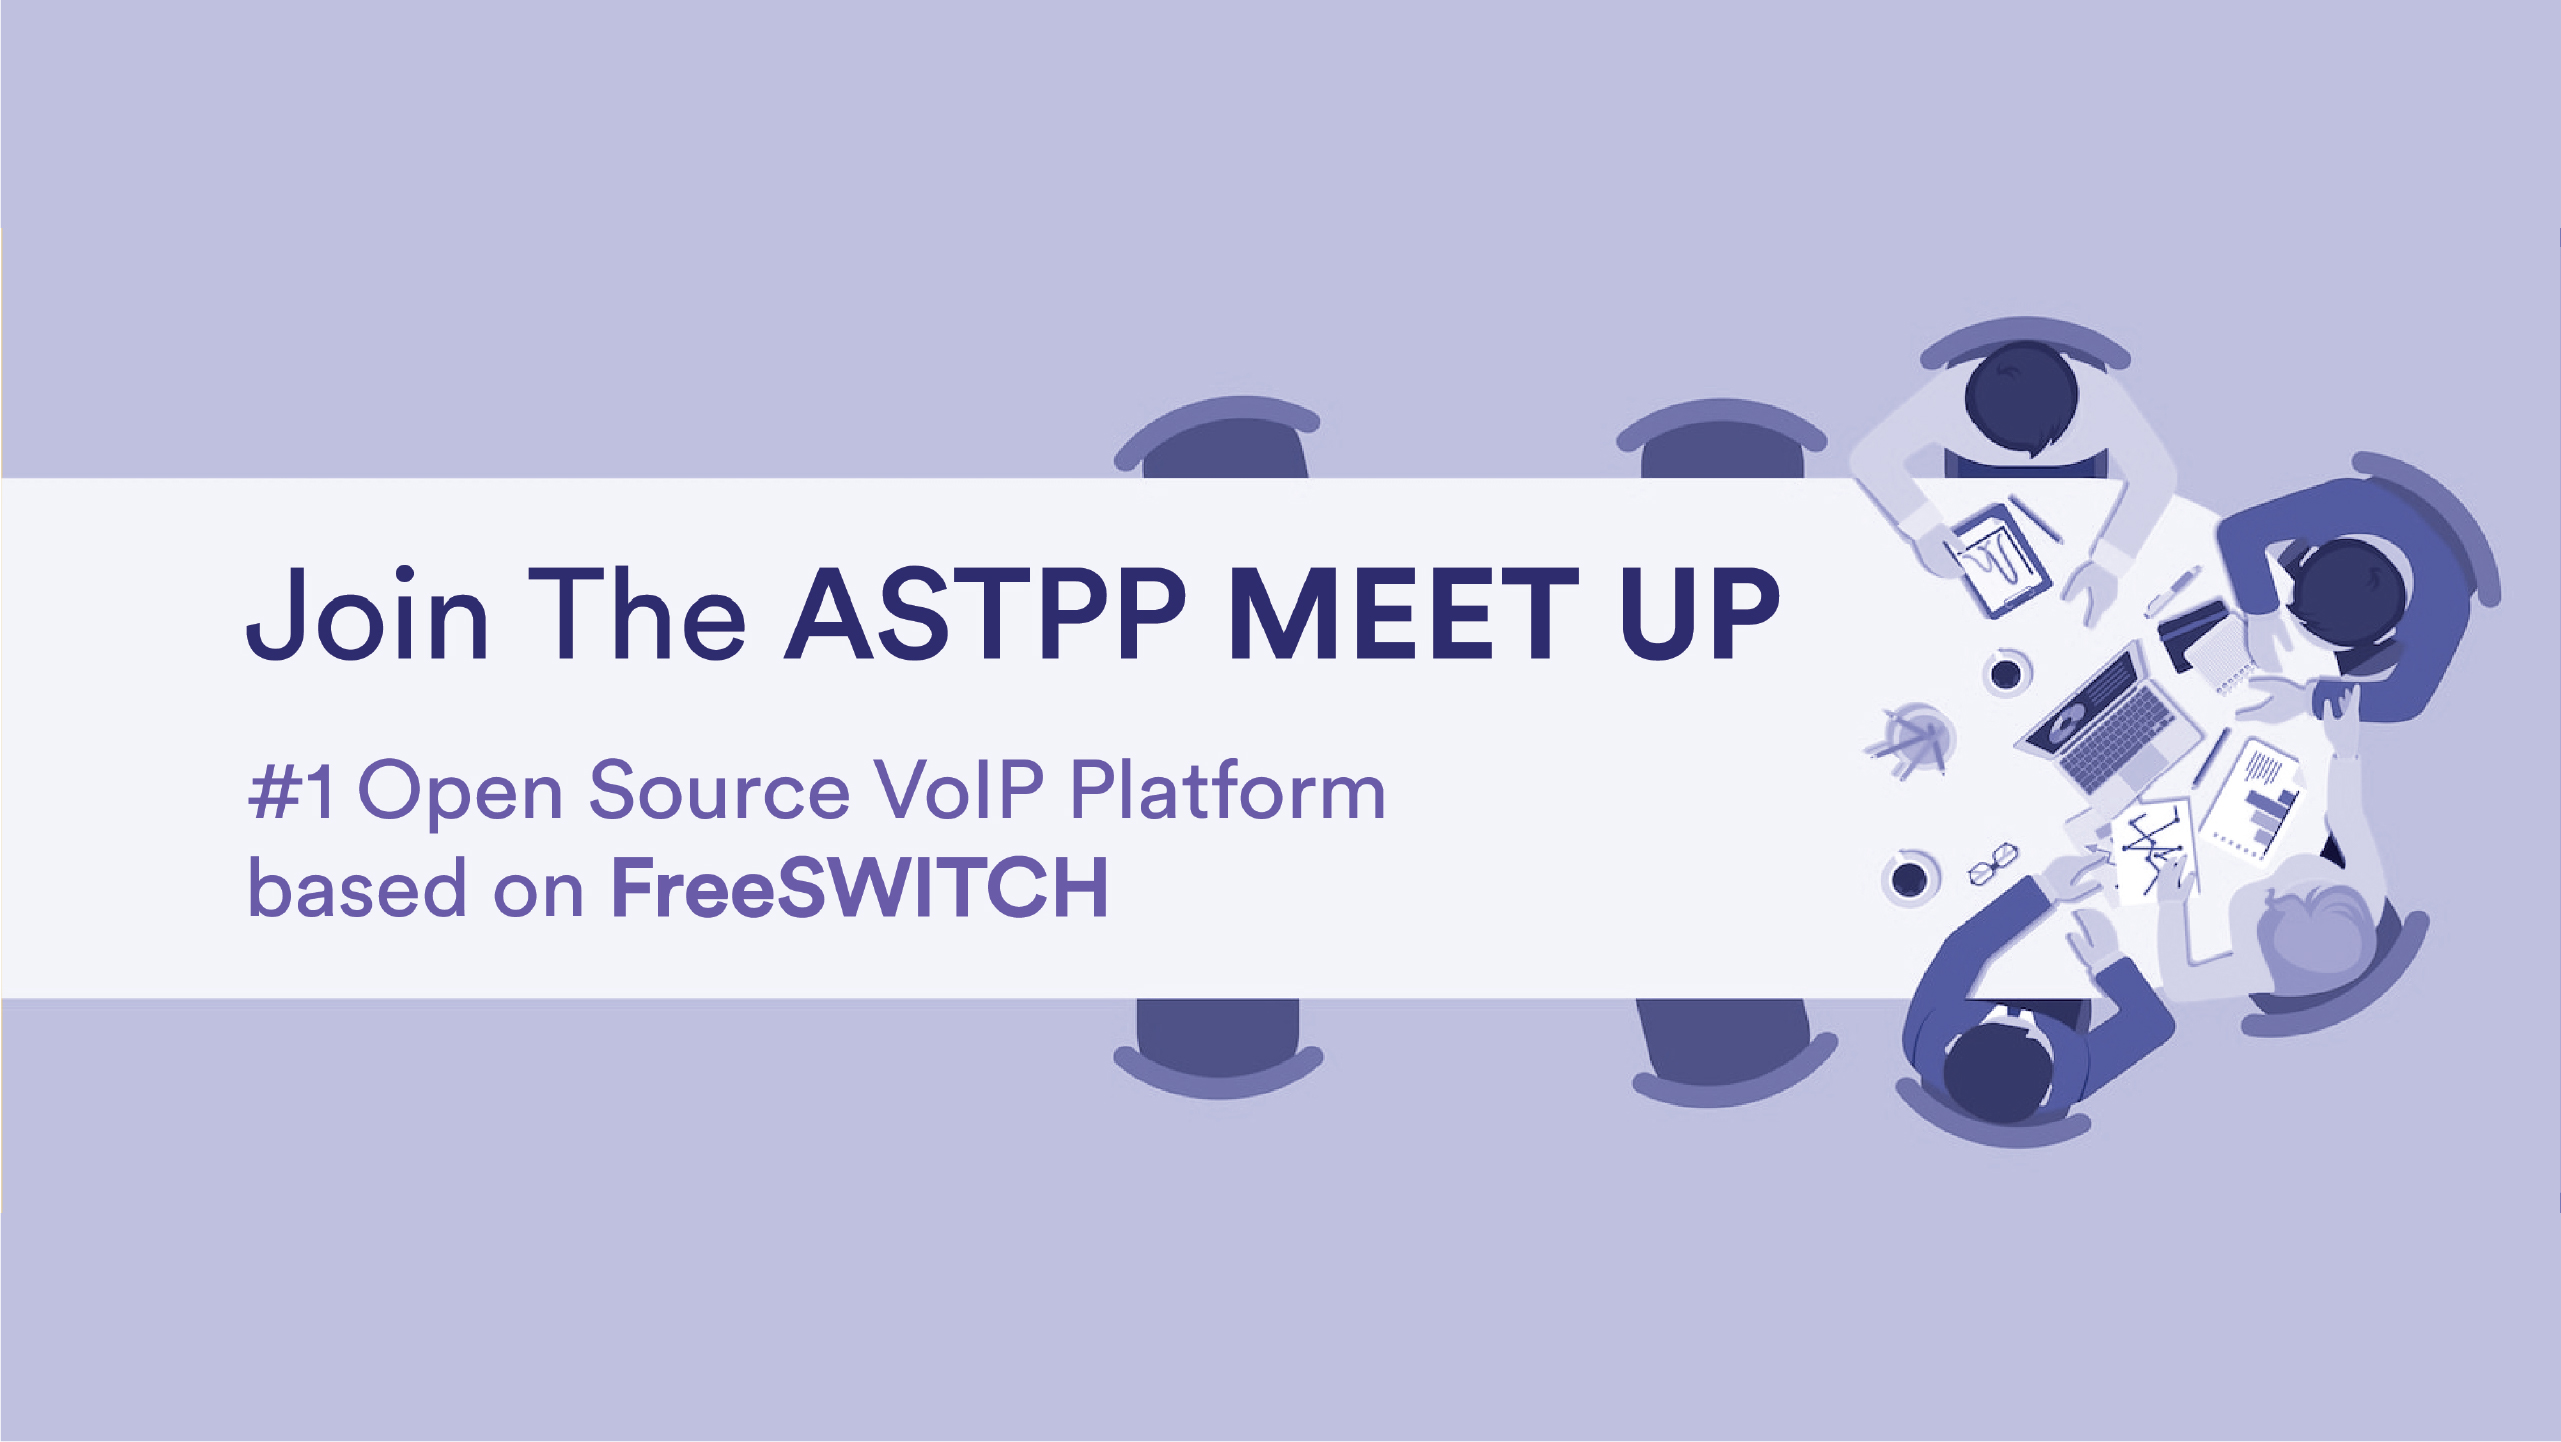 Join The ASTPP Meet UP - #1 Open Source VoIP Platform based on FreeSWITCH